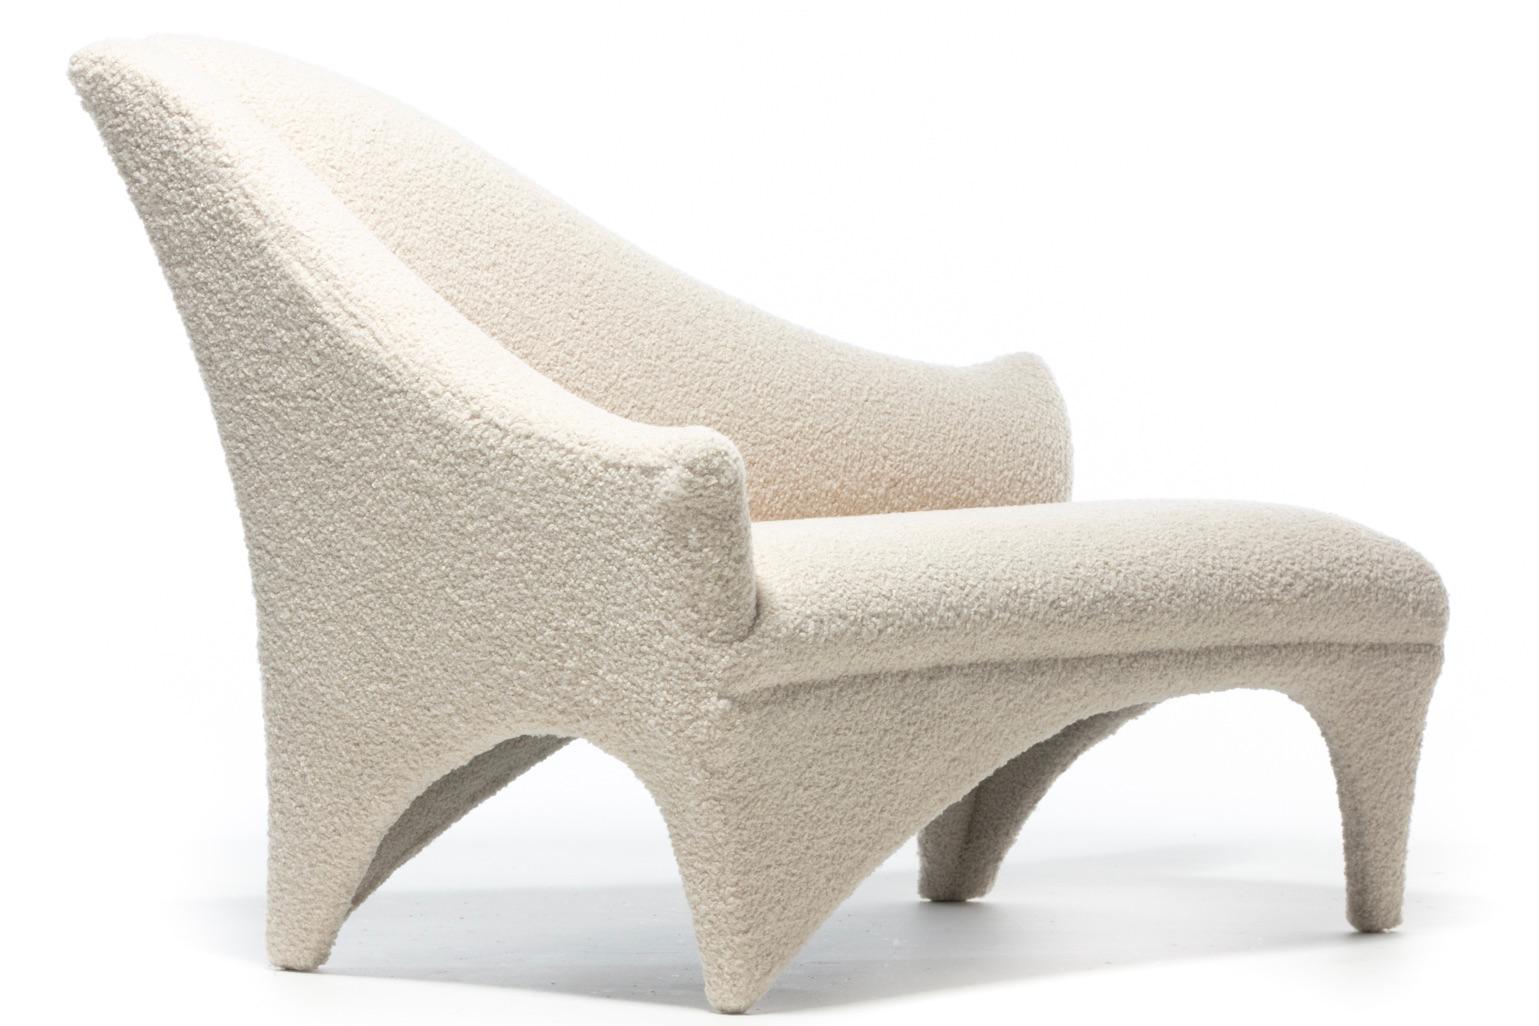 Vladimir Kagan A-Symmetric Settee in Ivory Bouclé by Directional, c. 1991 For Sale 7